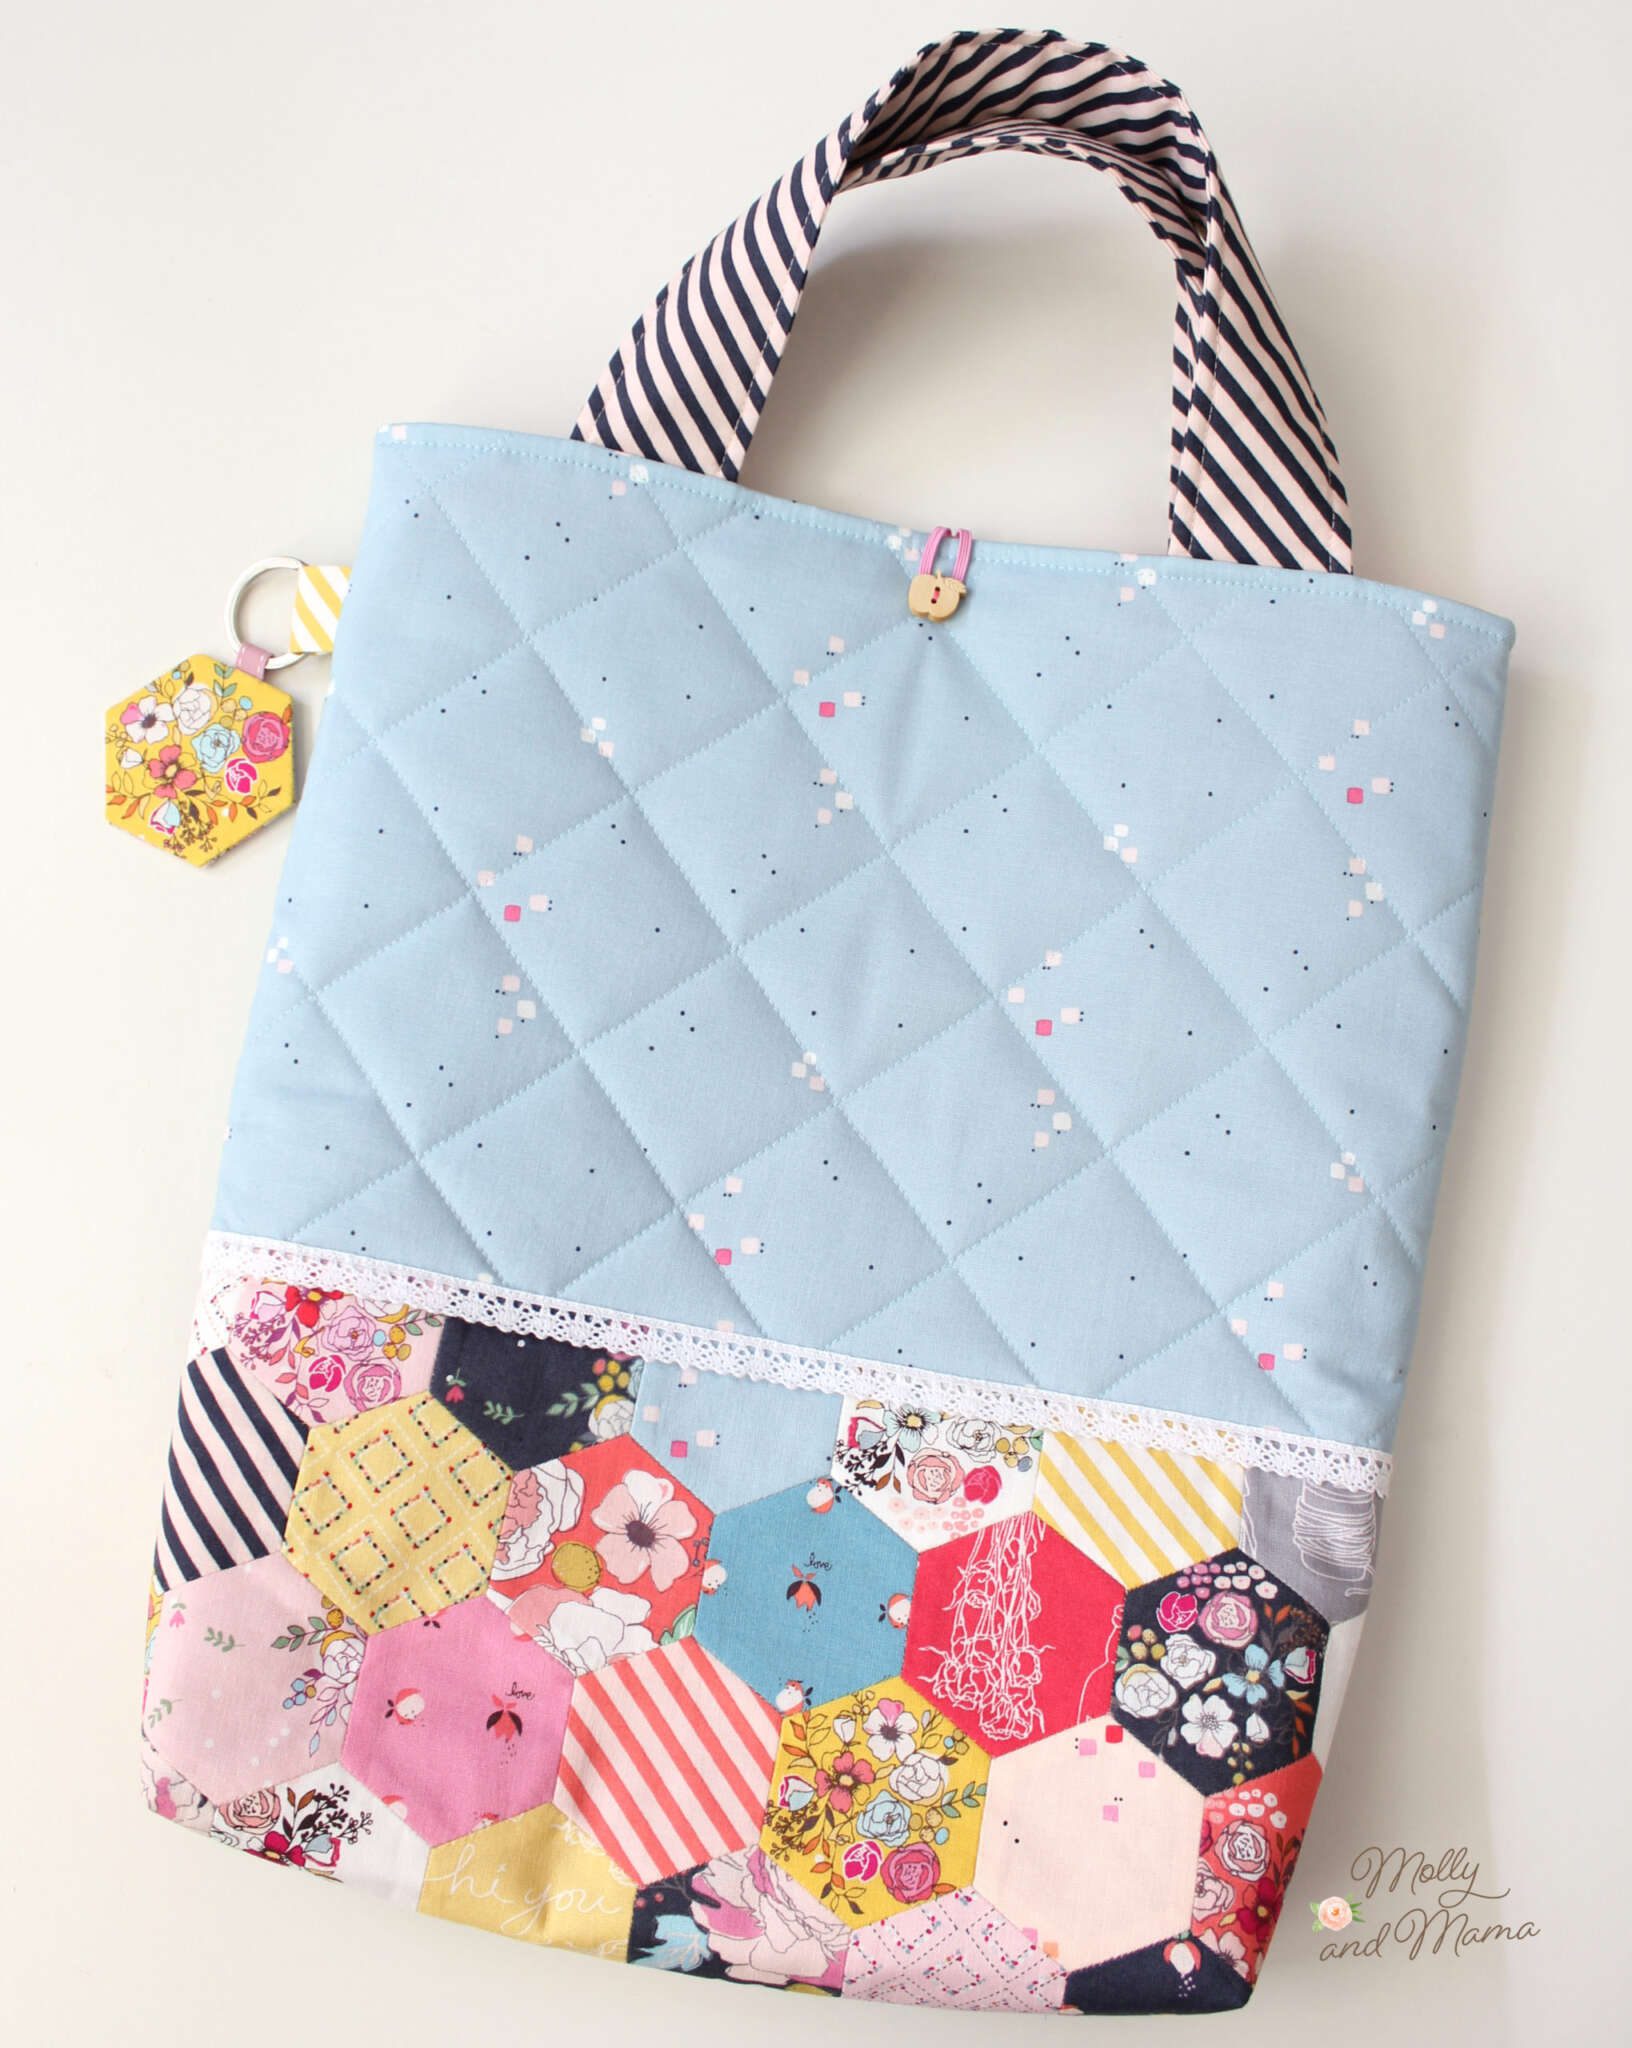 Bag Making With The Idyllic Fabric Collection By Minki Kim